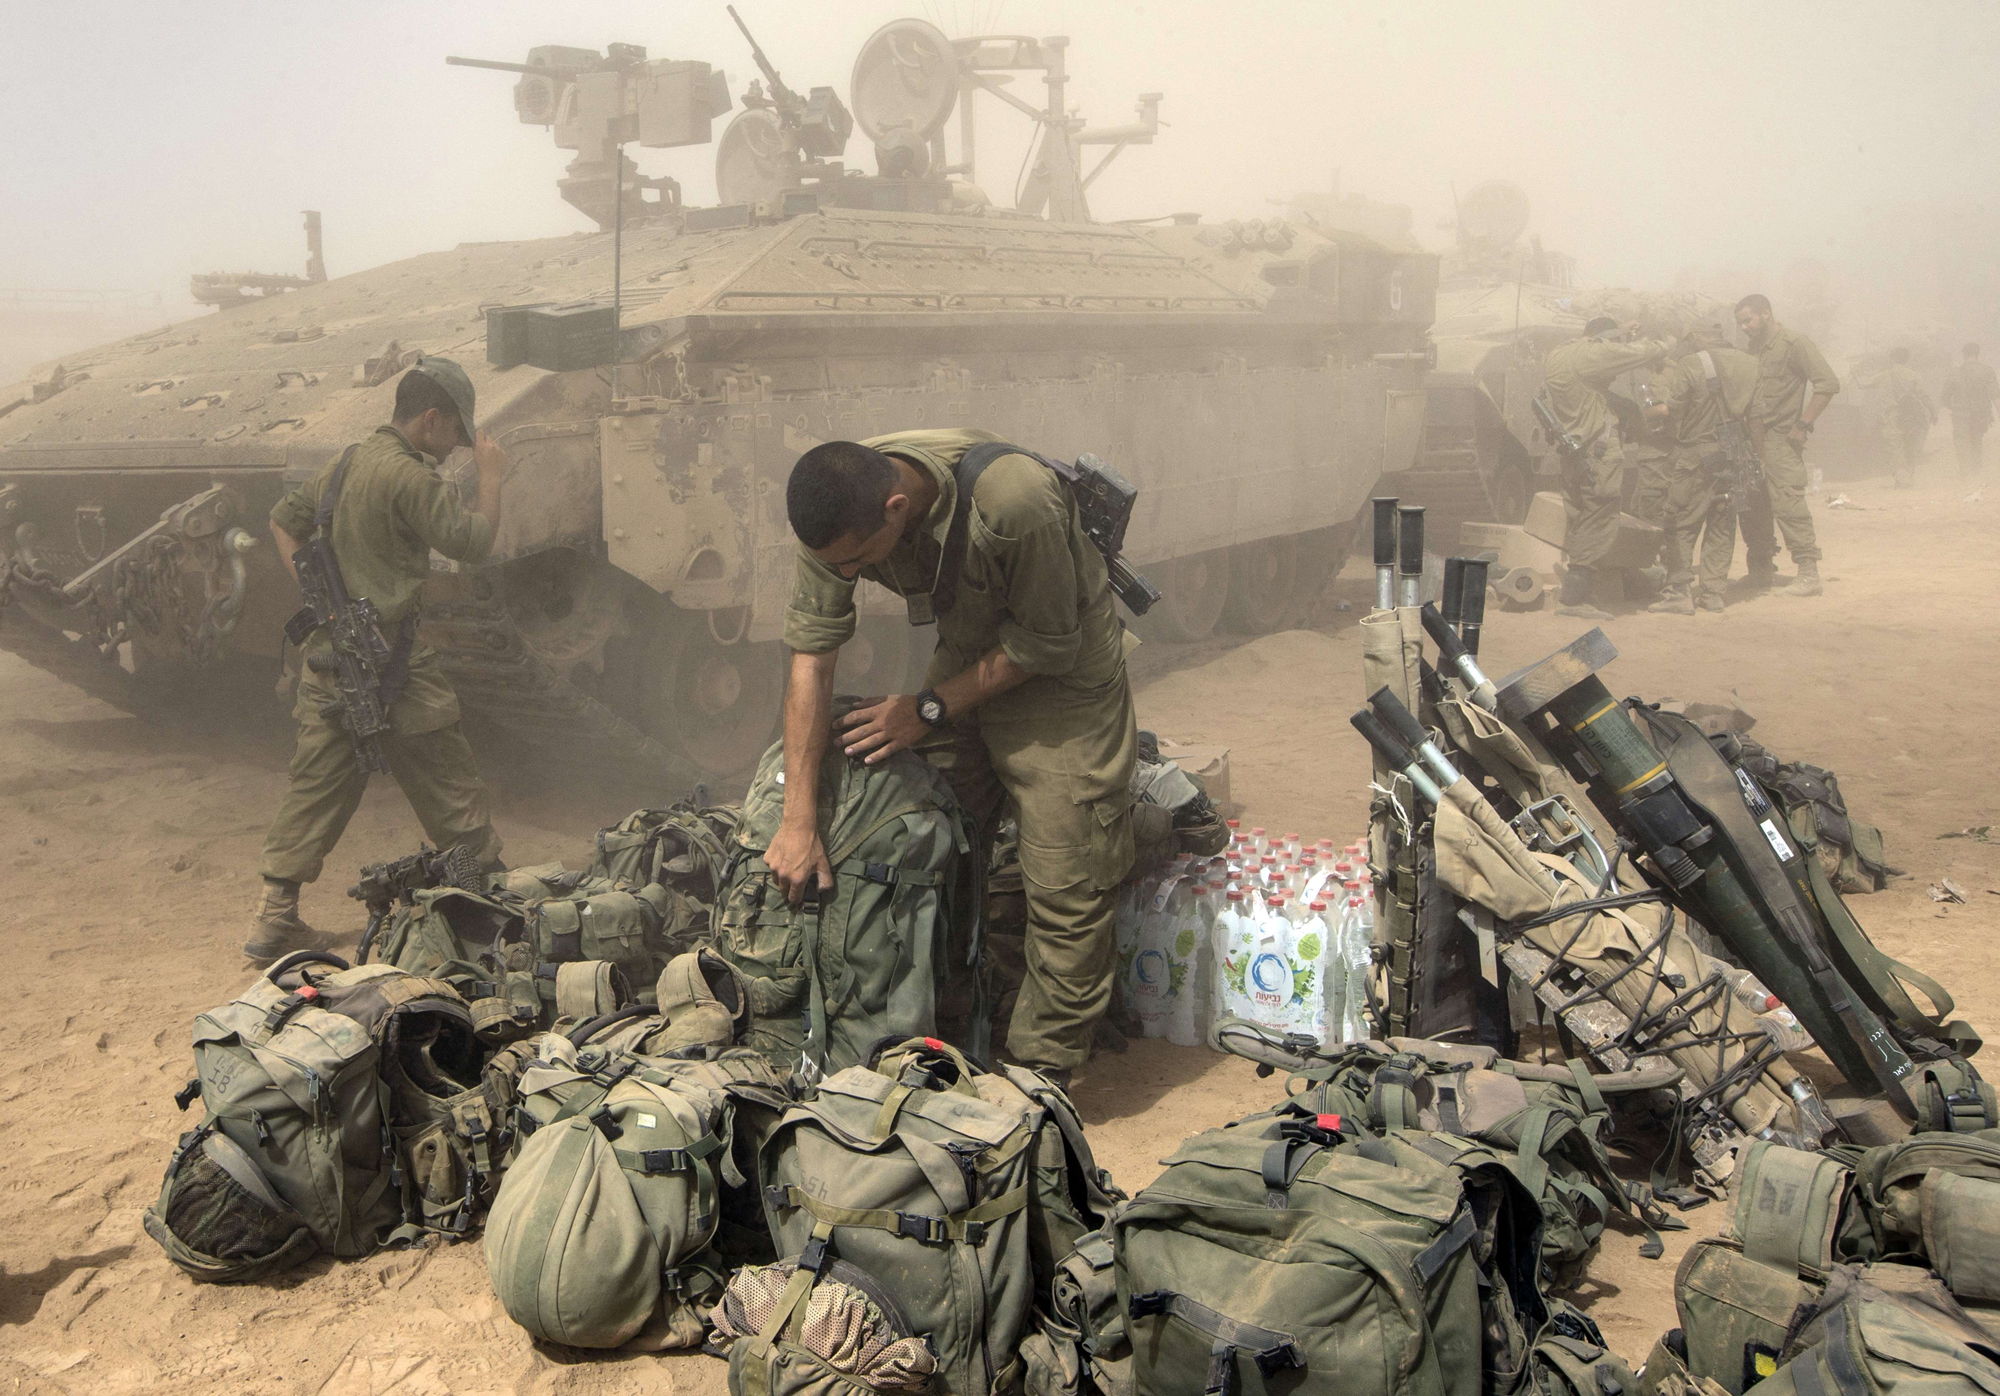 An Israeli soldier prepares his equipment at an army deployment area, on the southern Israeli border with the Gaza Strip, on August 1, 2014.